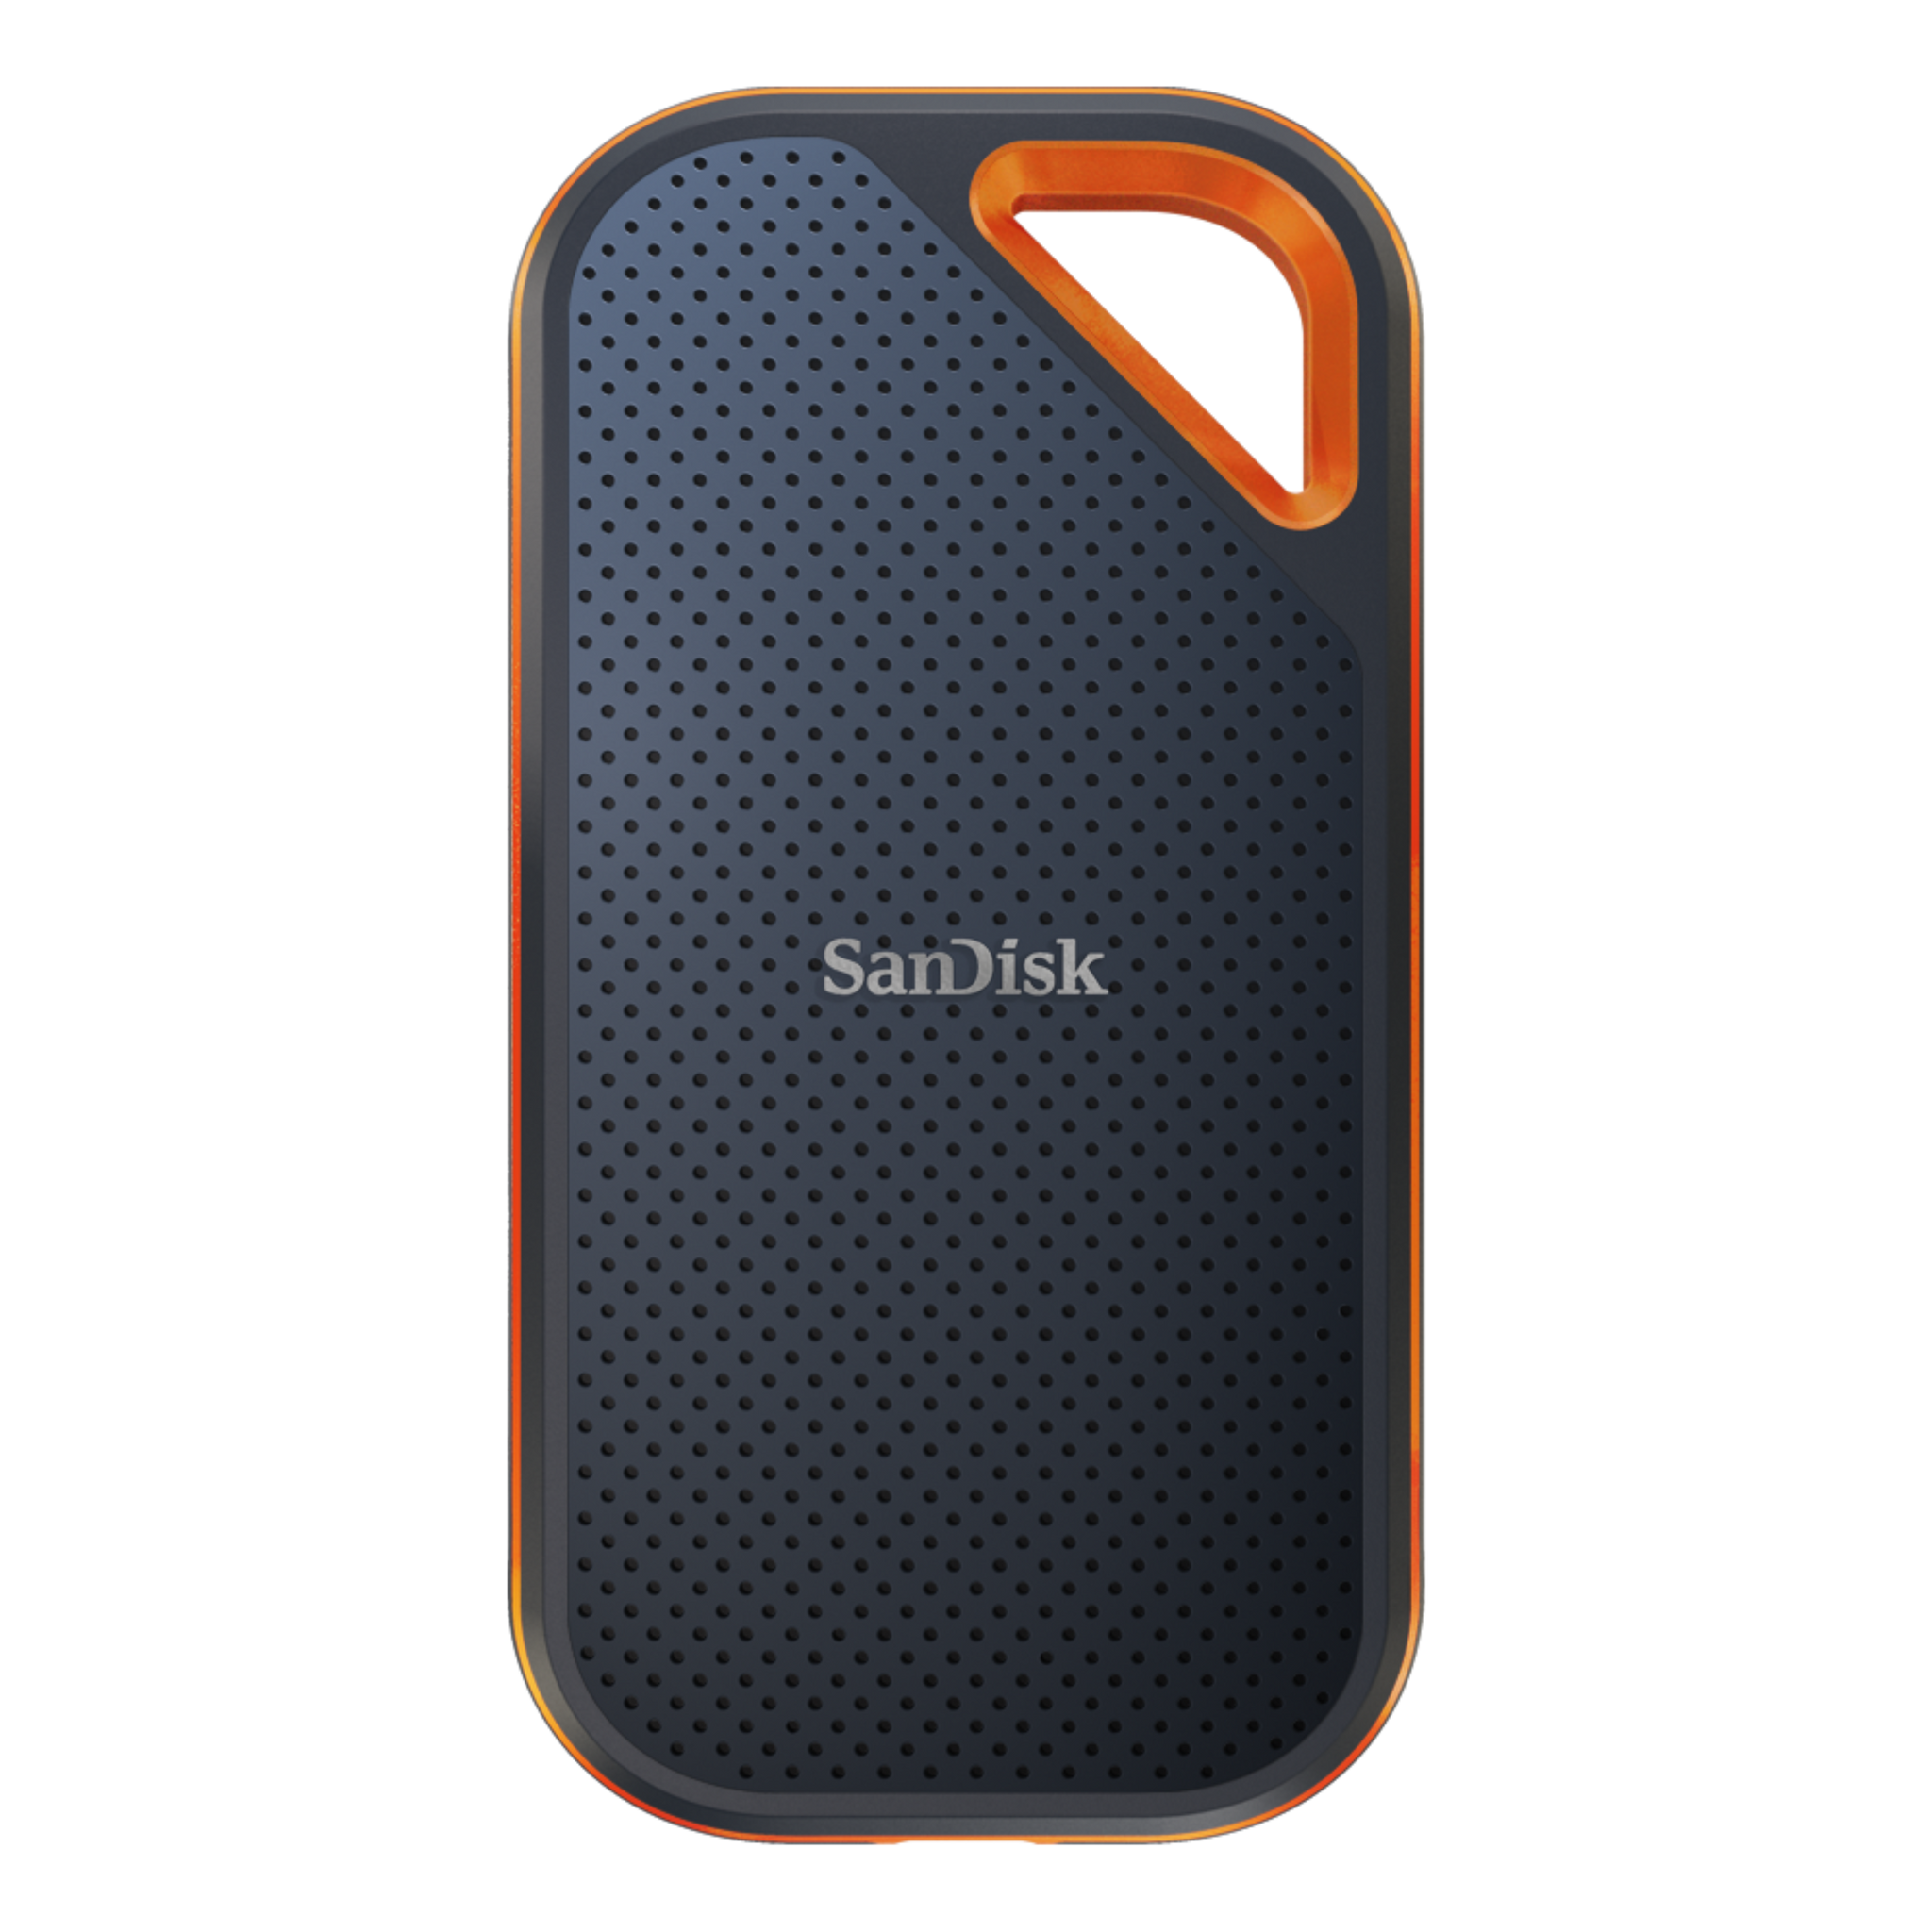 SanDisk Extreme Pro Portable SSD E81 2000MB/s USB 3.1 for Windows & Mac Type-C Type-A IP55 Dust and Water-Resistant-Data Storage-futuromic